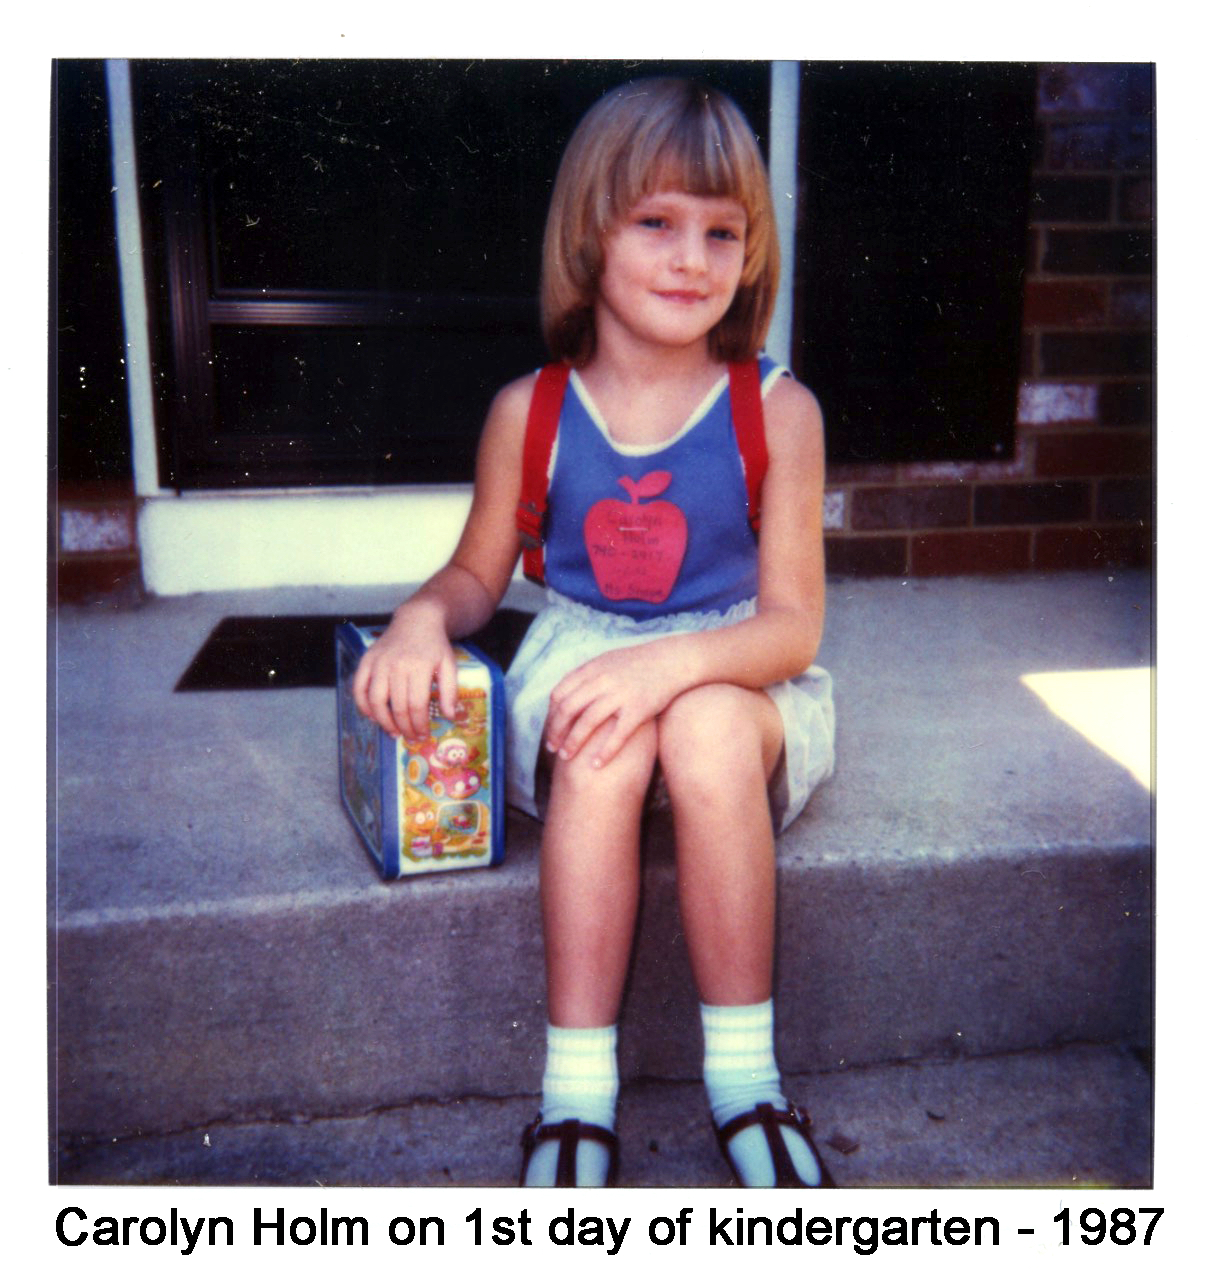 Carolyn Holm sitting on our front porch before leaving for kindergarten